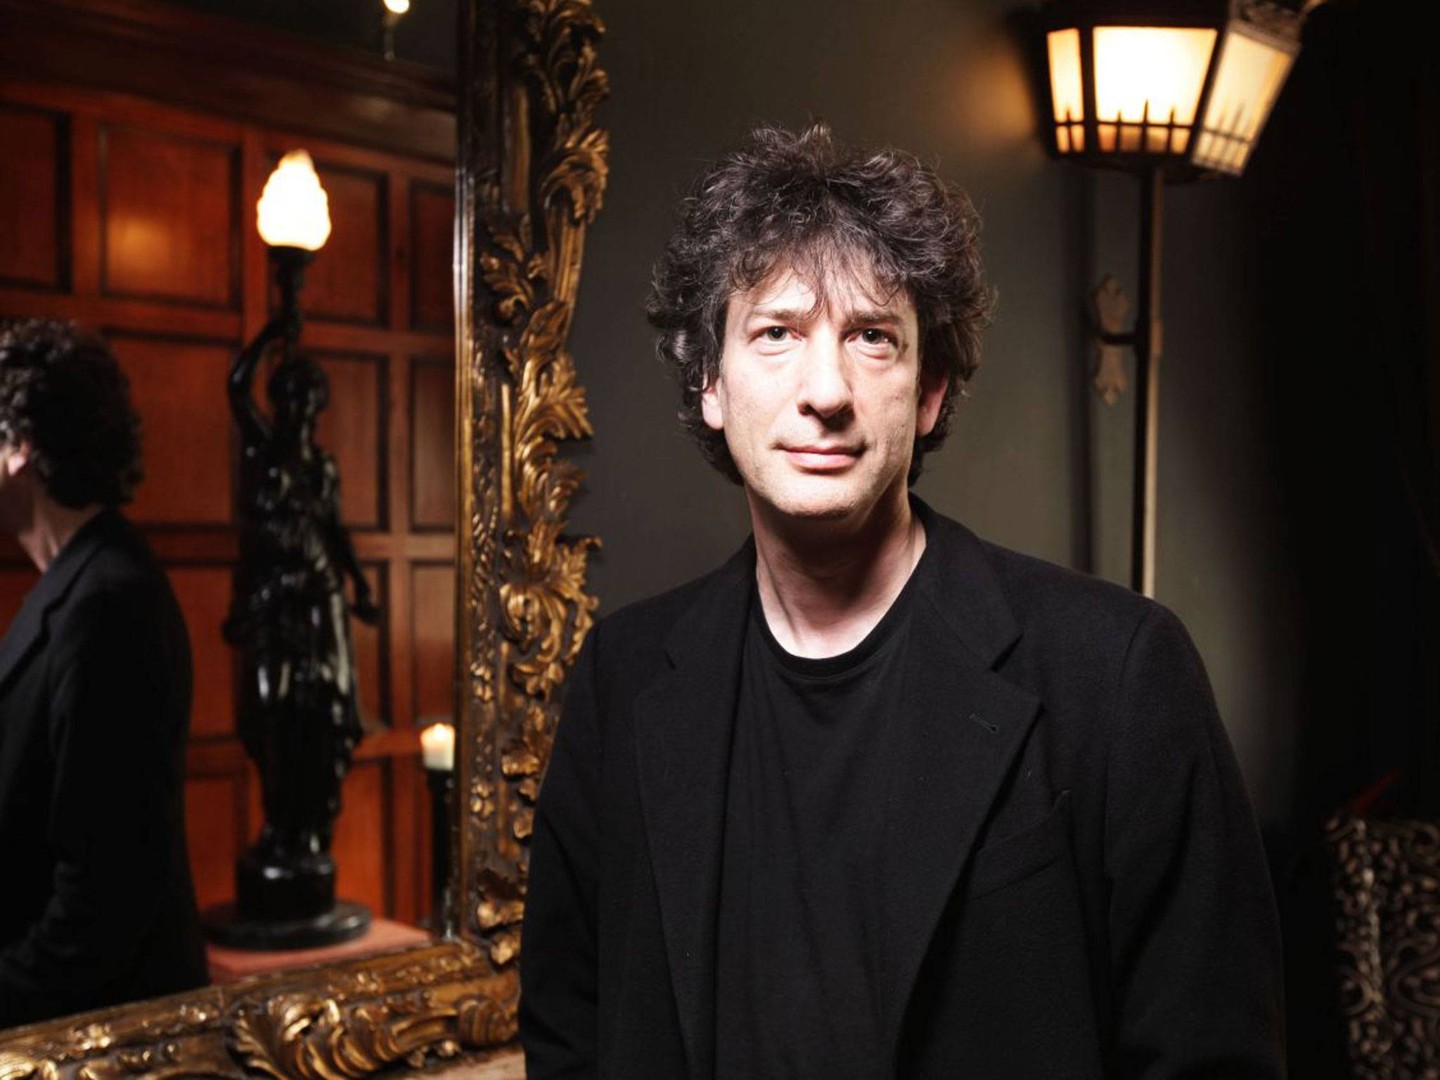 Neil Gaiman releases new short story collection this February